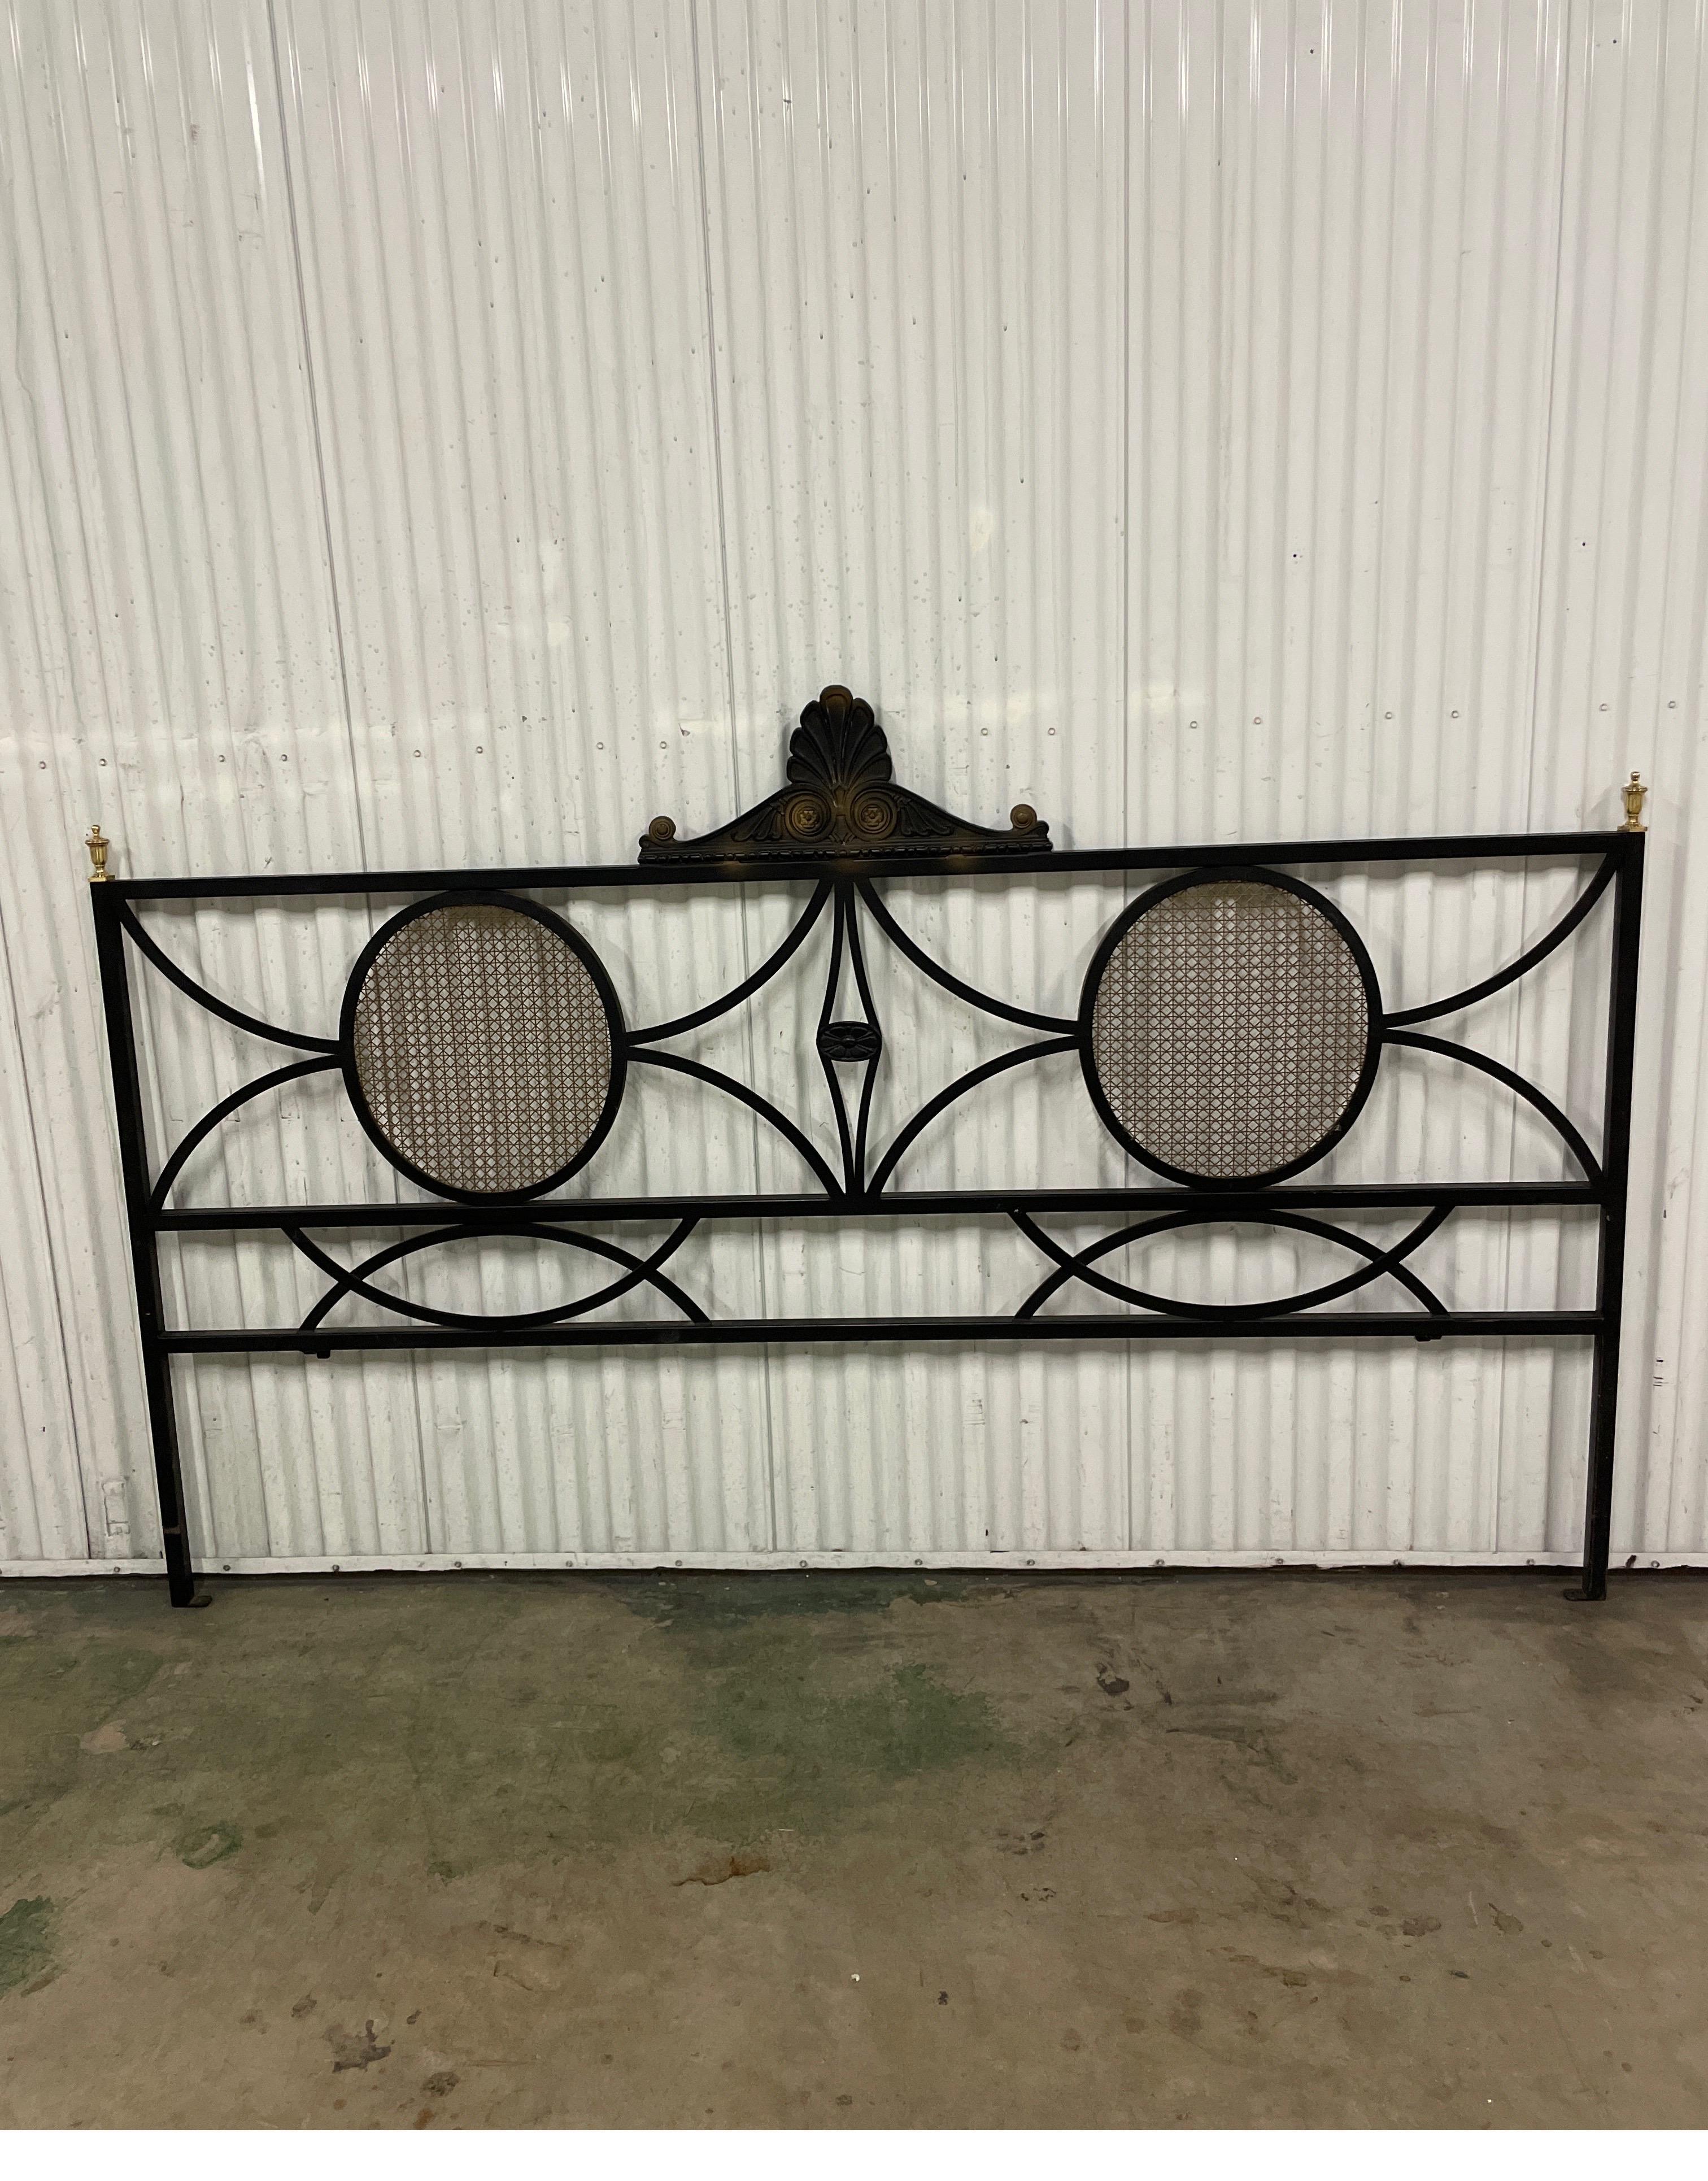 Vintage Neoclassical style King headboard in black wrought iron with gold metal caning and brass finials. 